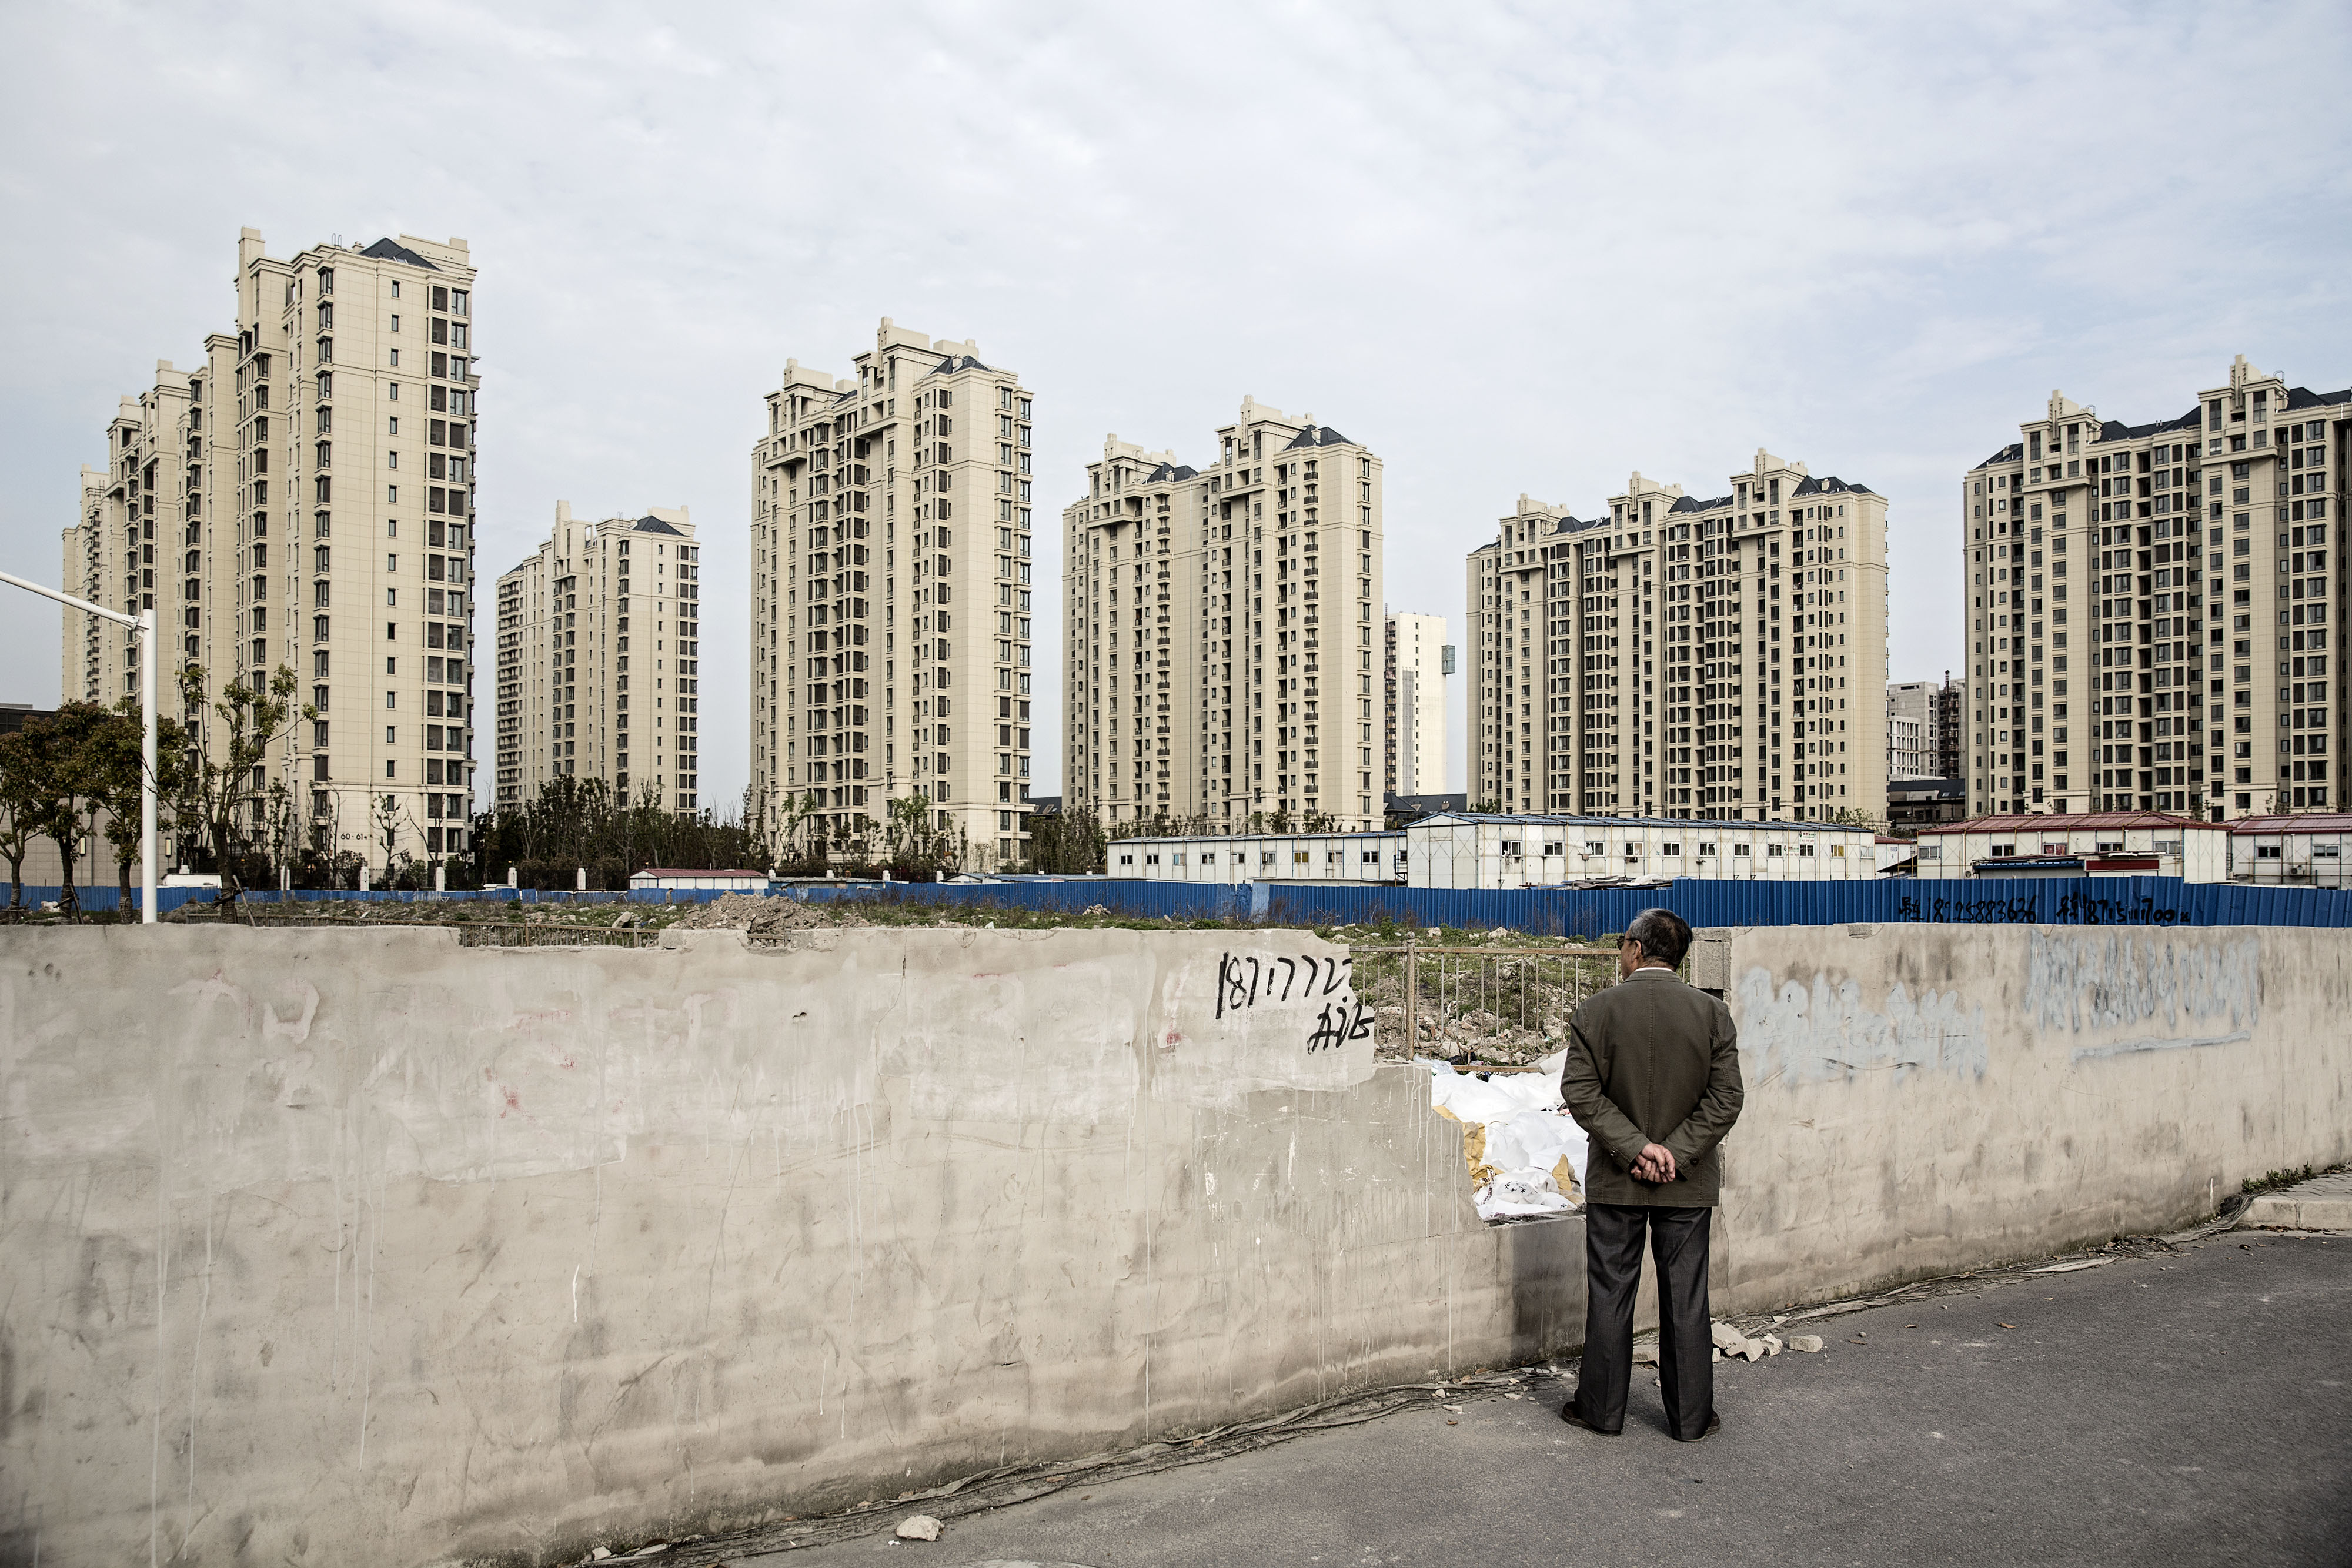 Buildings in the Jiading district of Shanghai (credit: Getty images)